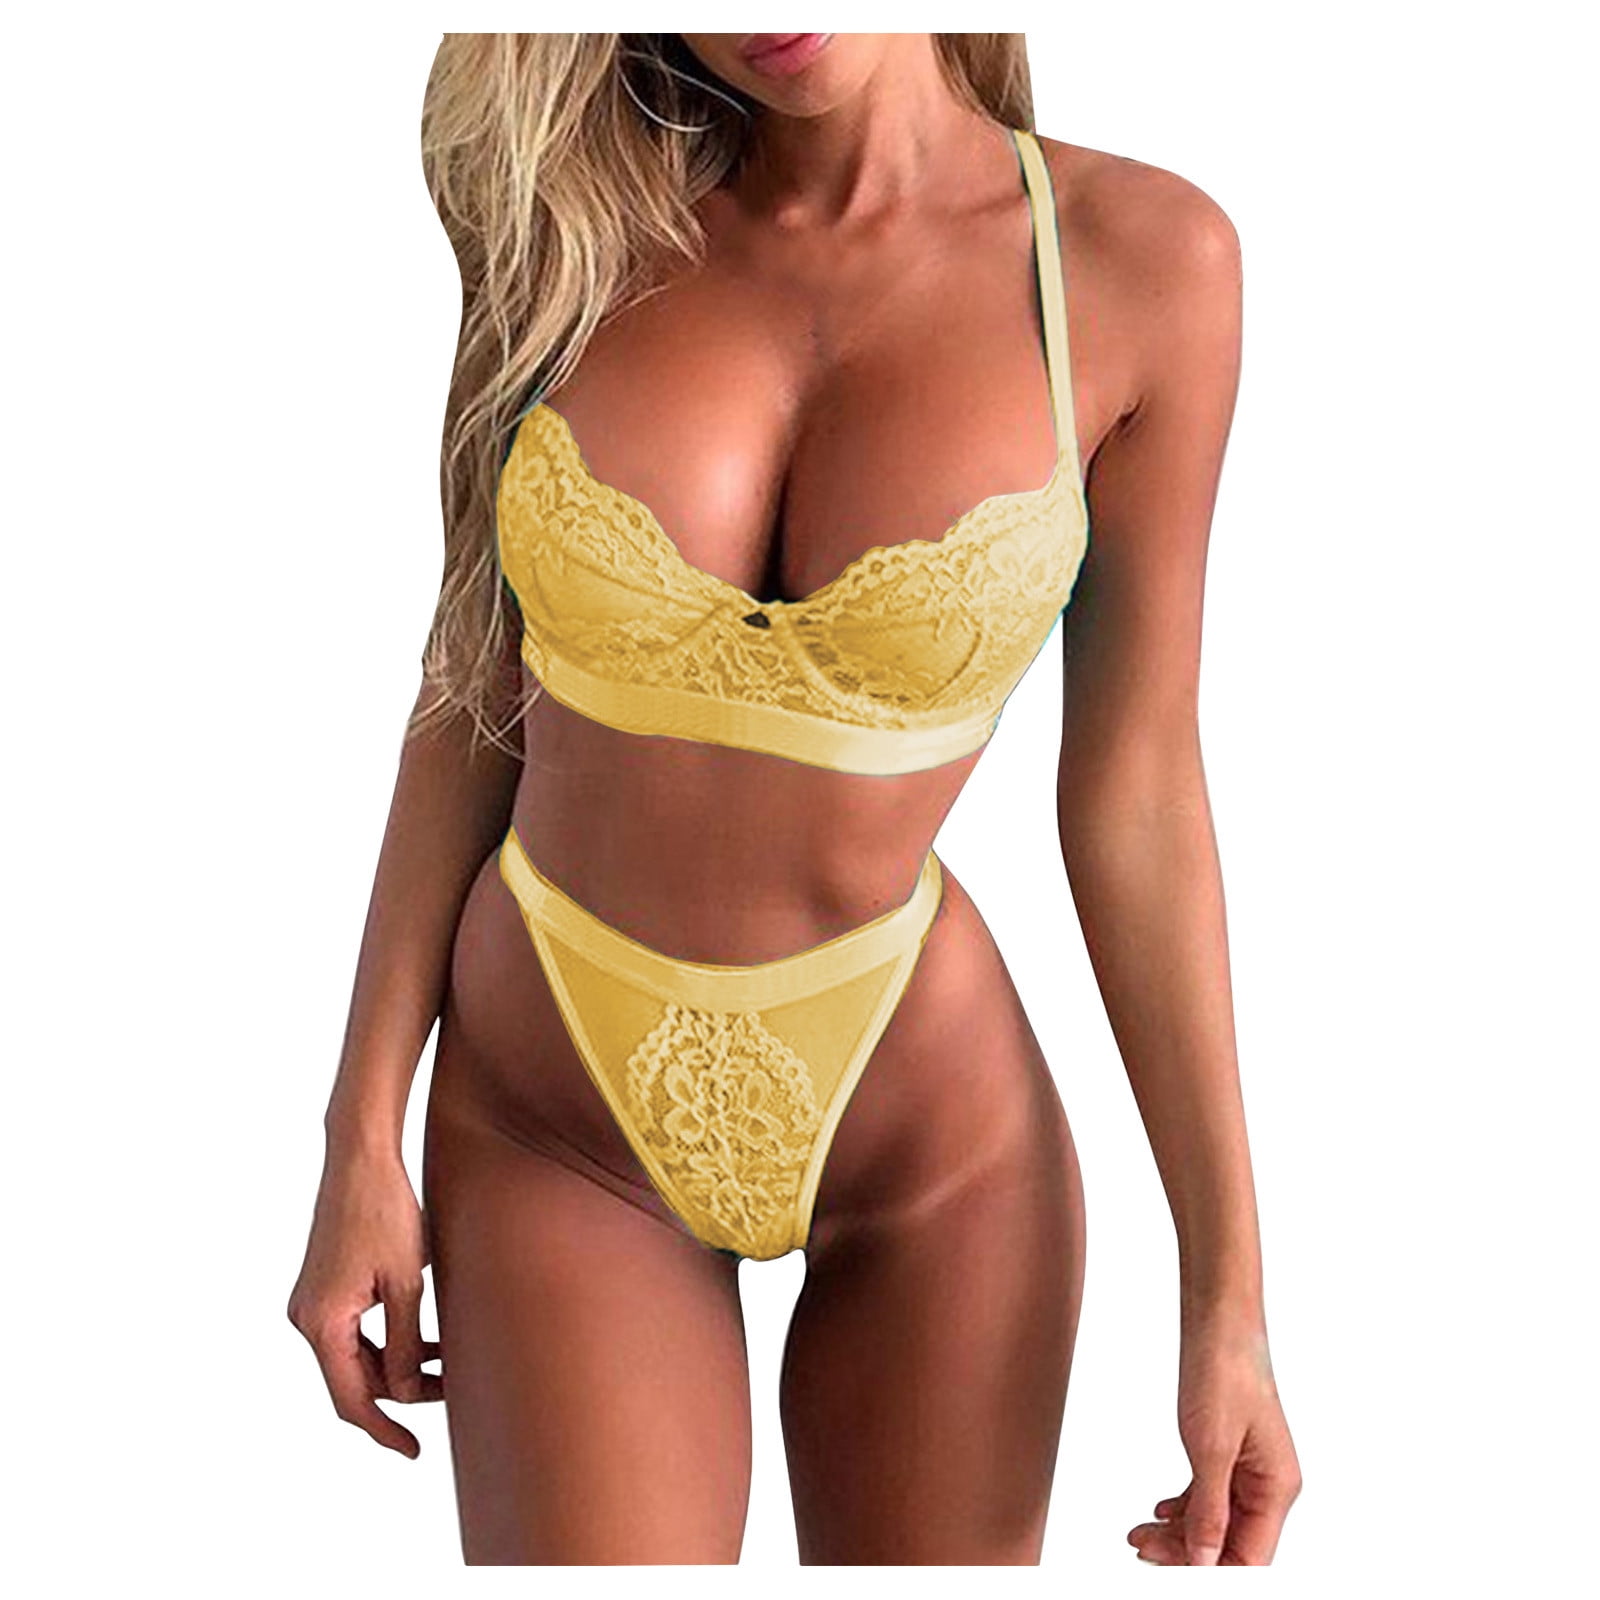 JDEFEG Lace Bra and Underwear Set 2022 Women Thin Cup Lace